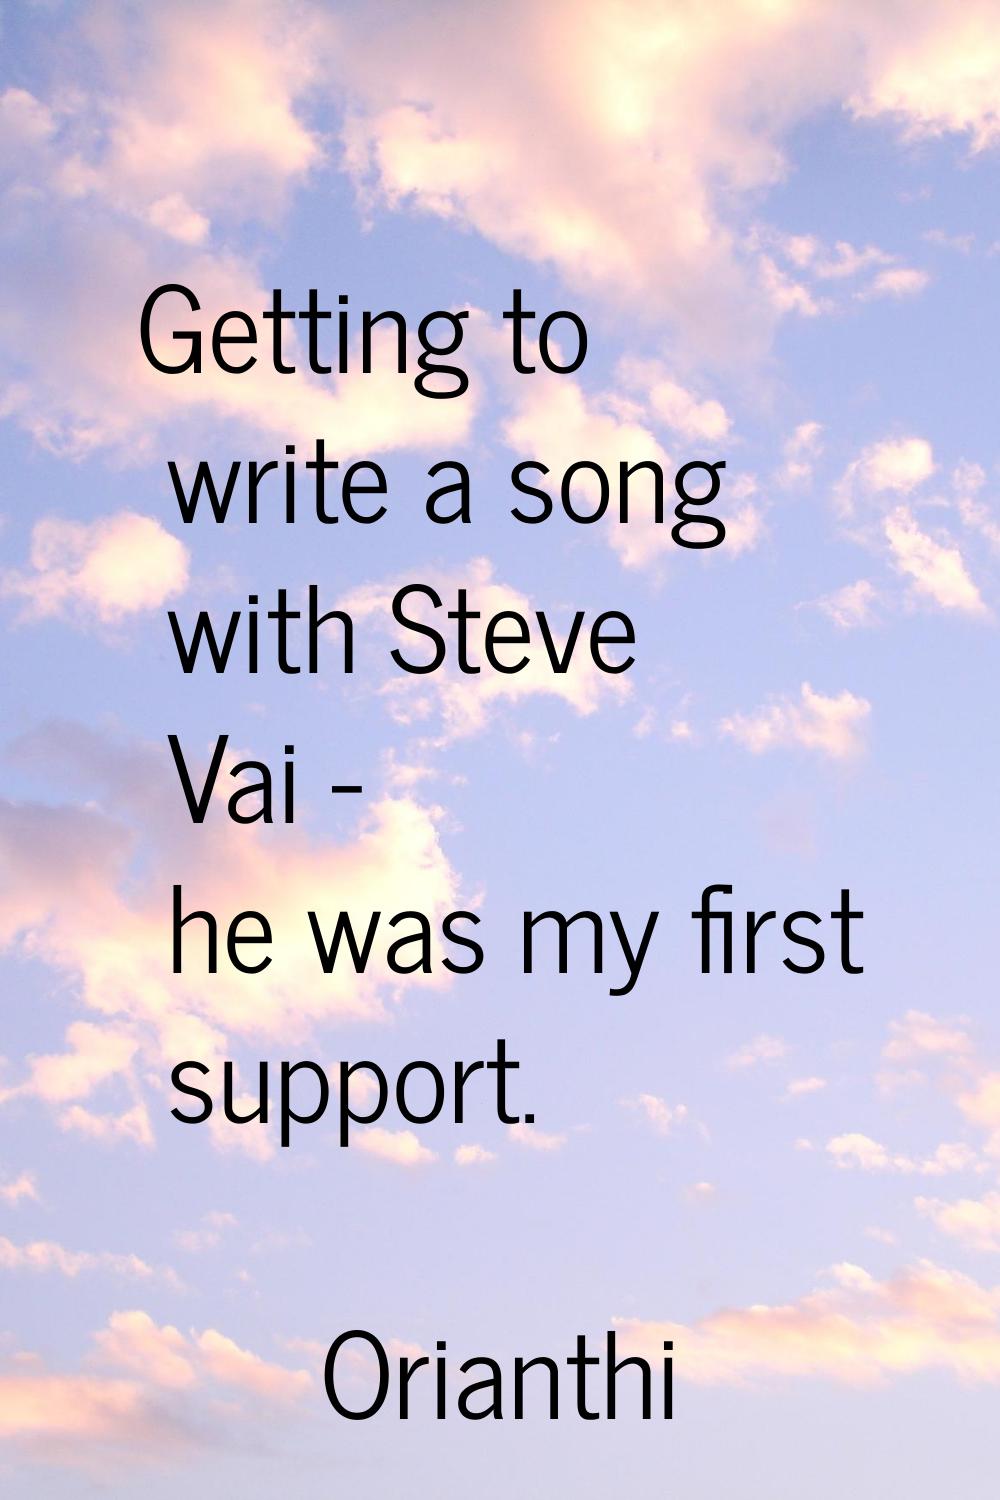 Getting to write a song with Steve Vai - he was my first support.